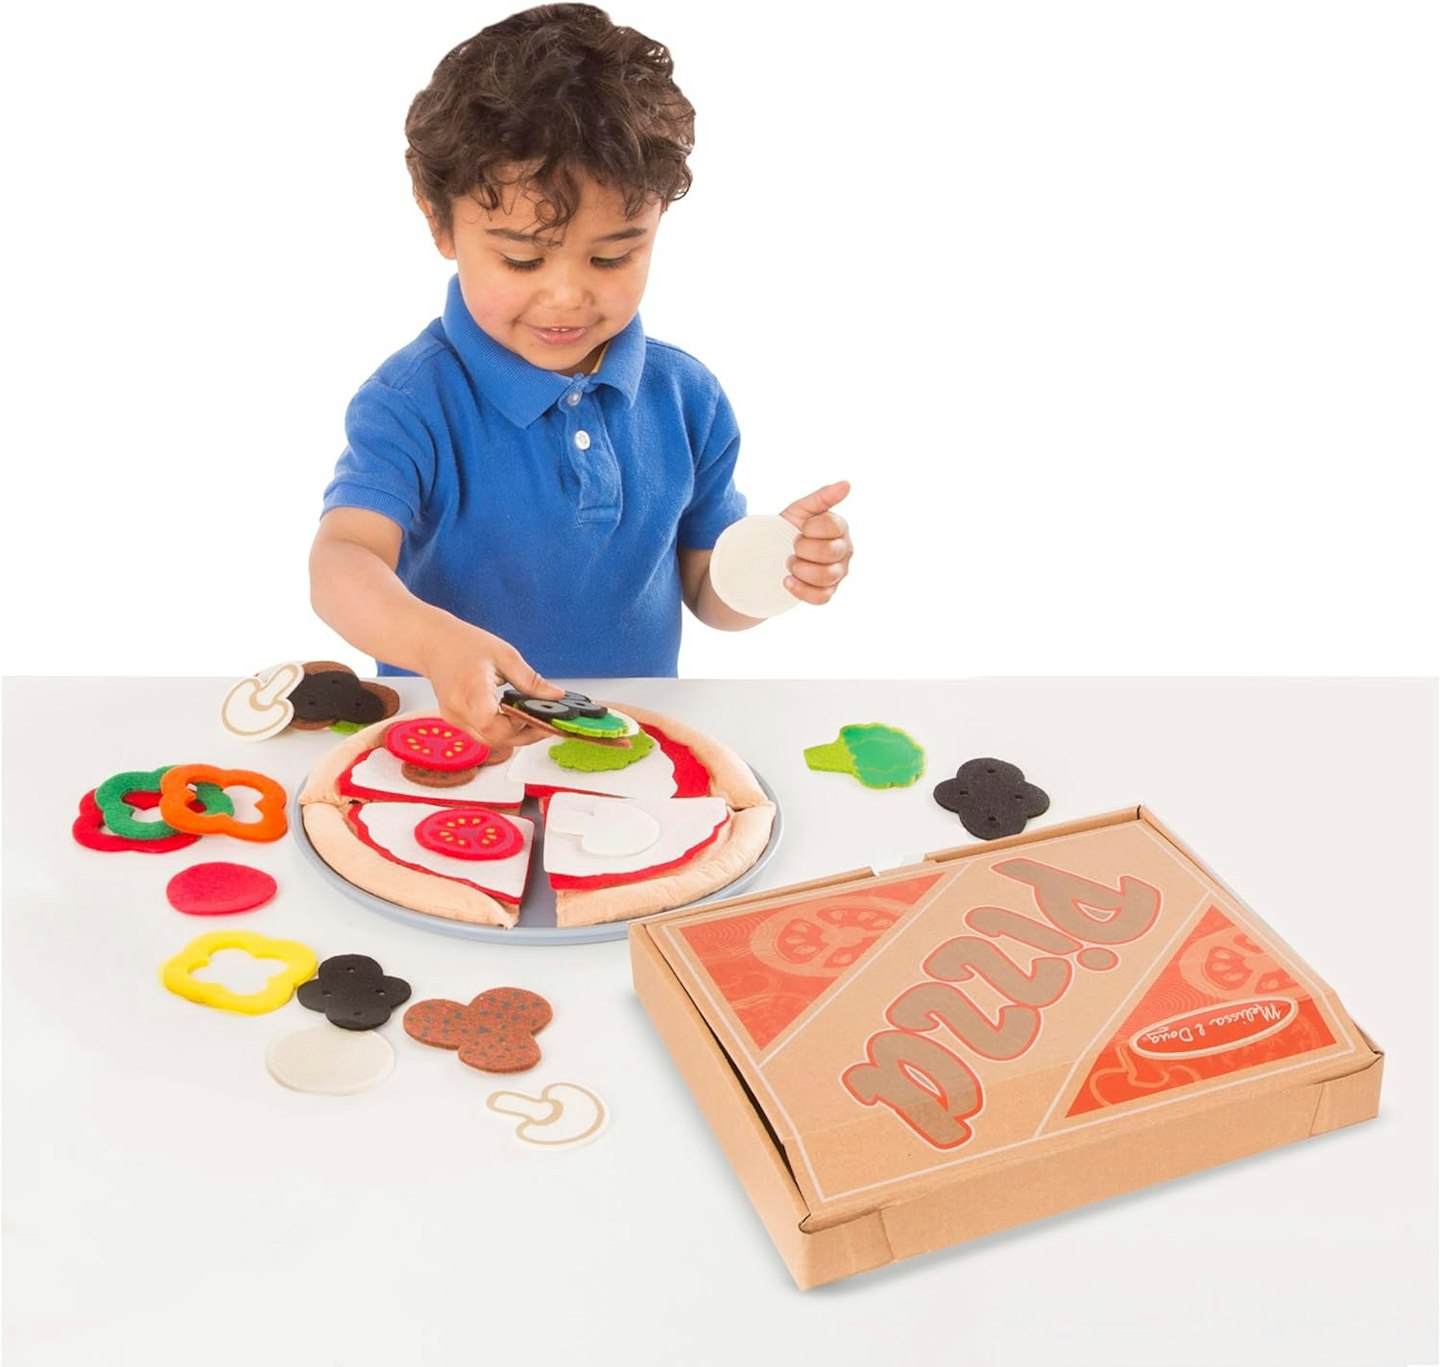 Boy putting felt toppings onto a felt toy food pizza base with realistic pizza box